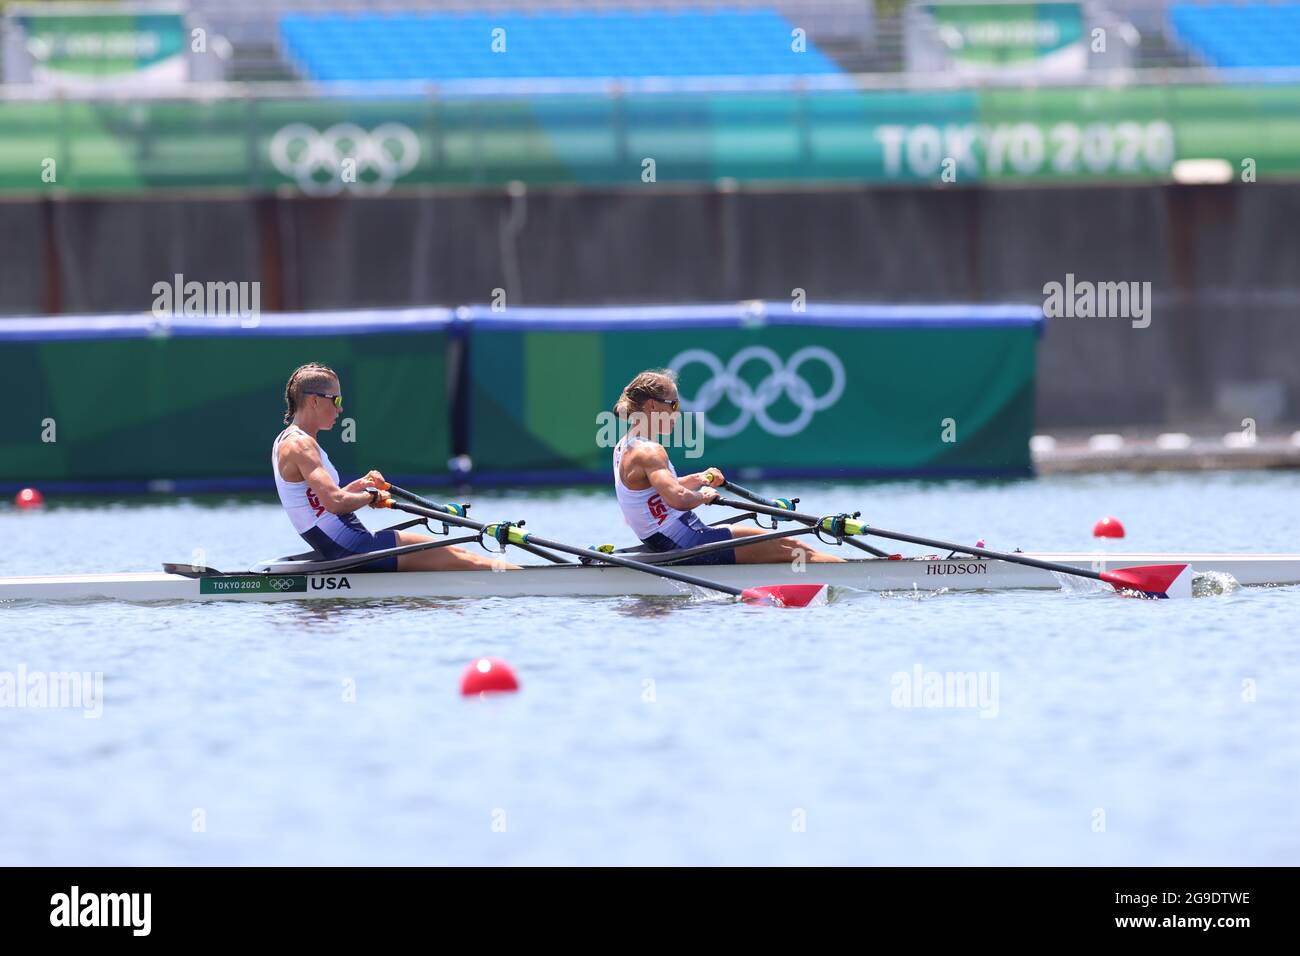 Tokyo, Japan. 25th July, 2021. RECKFORD Mary & SECHSER Michelle (USA) Rowing : Women's Lightweight Double Sculls Repechage during the Tokyo 2020 Olympic Games at the Sea Forest Waterway in Tokyo, Japan . Credit: YUTAKA/AFLO SPORT/Alamy Live News Stock Photo